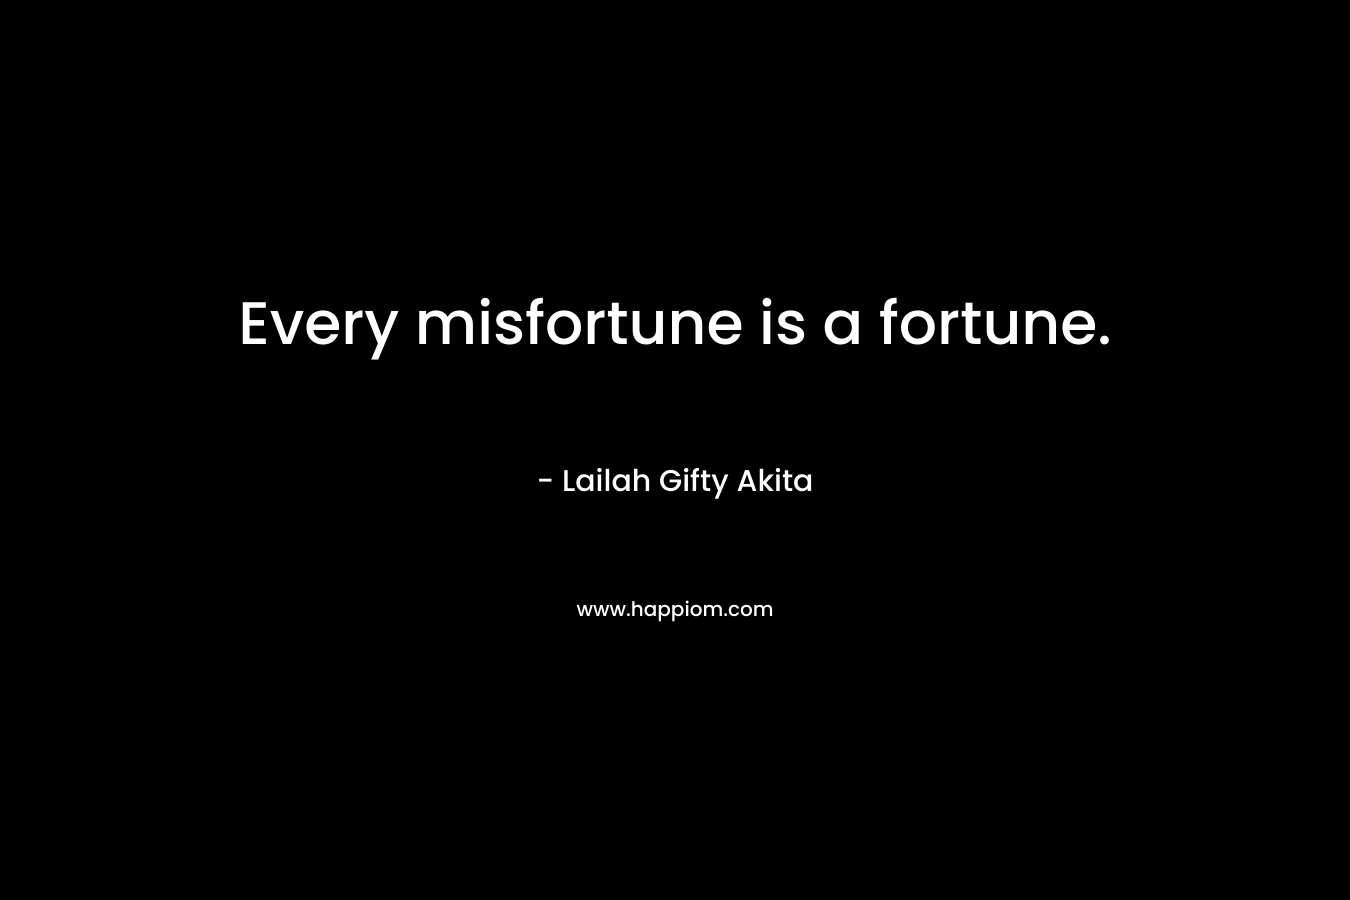 Every misfortune is a fortune.